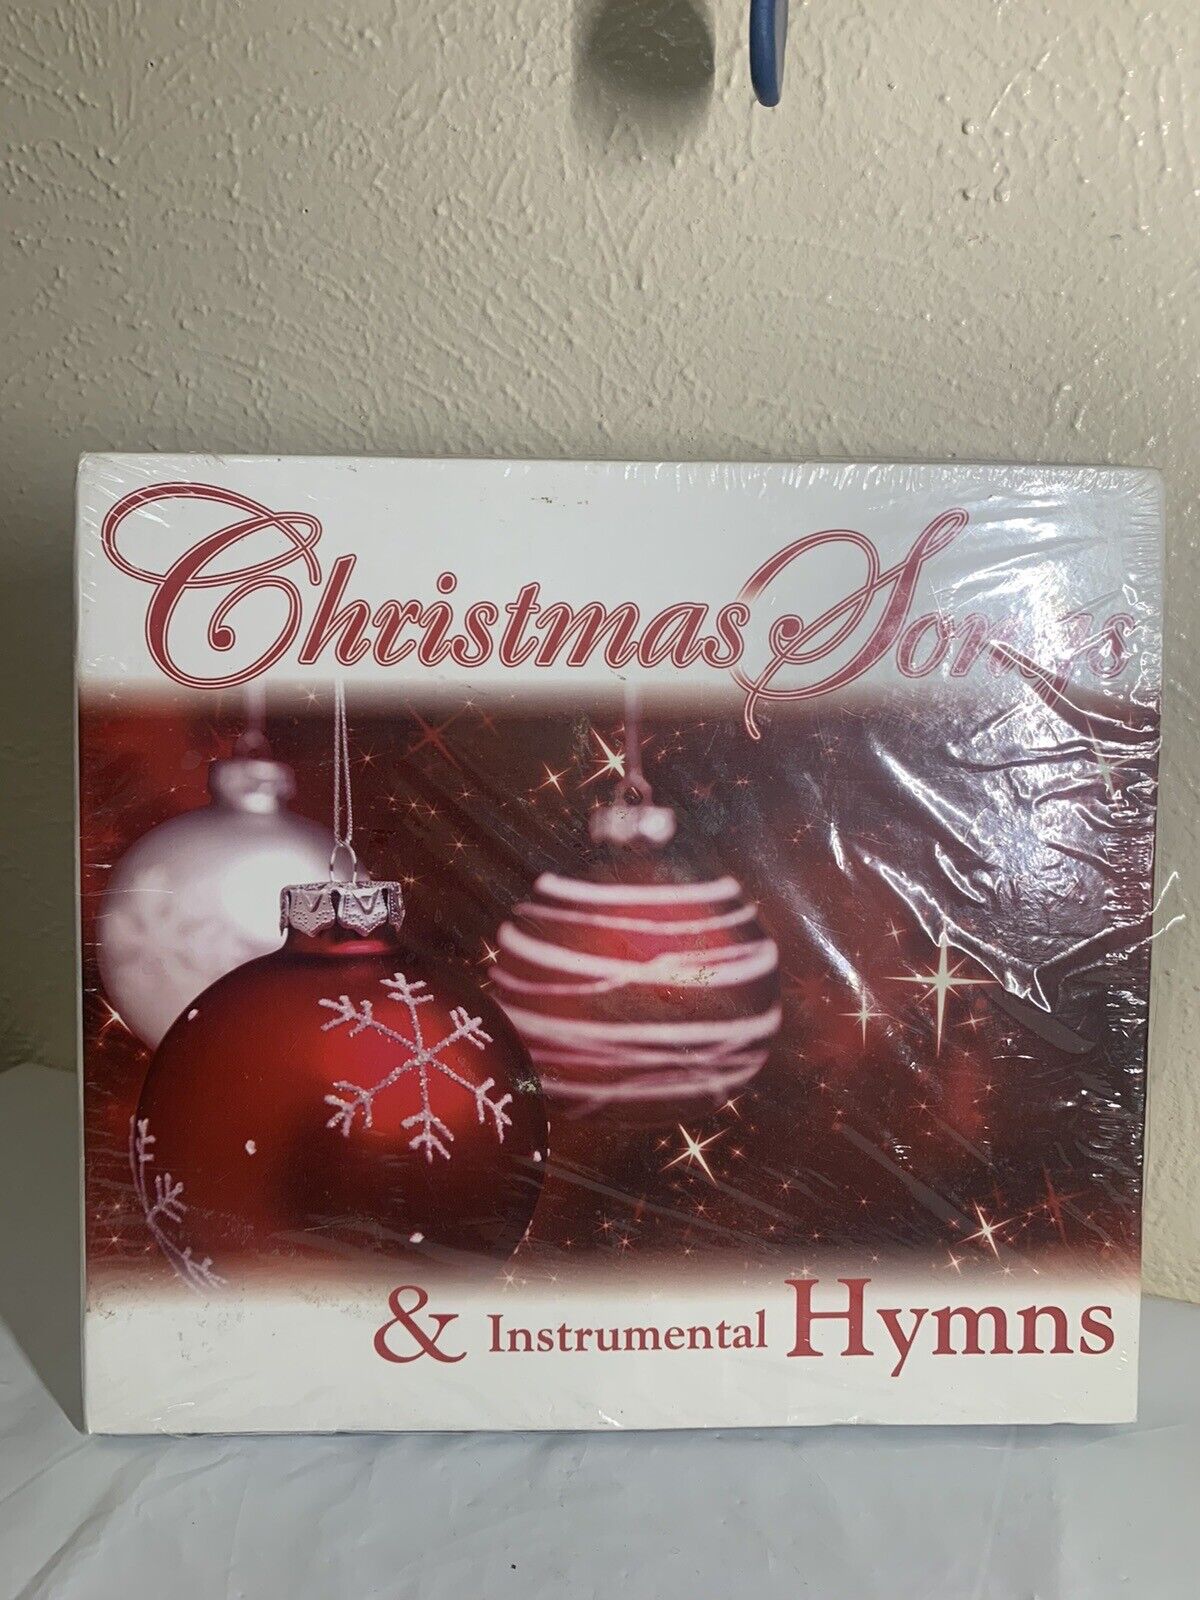 CHRISTMAS SONGS AND INSTRUMENTAL HYMNS 8 CD'S 2008 HOLY NIGHT 1ST NOEL JOY TO TH